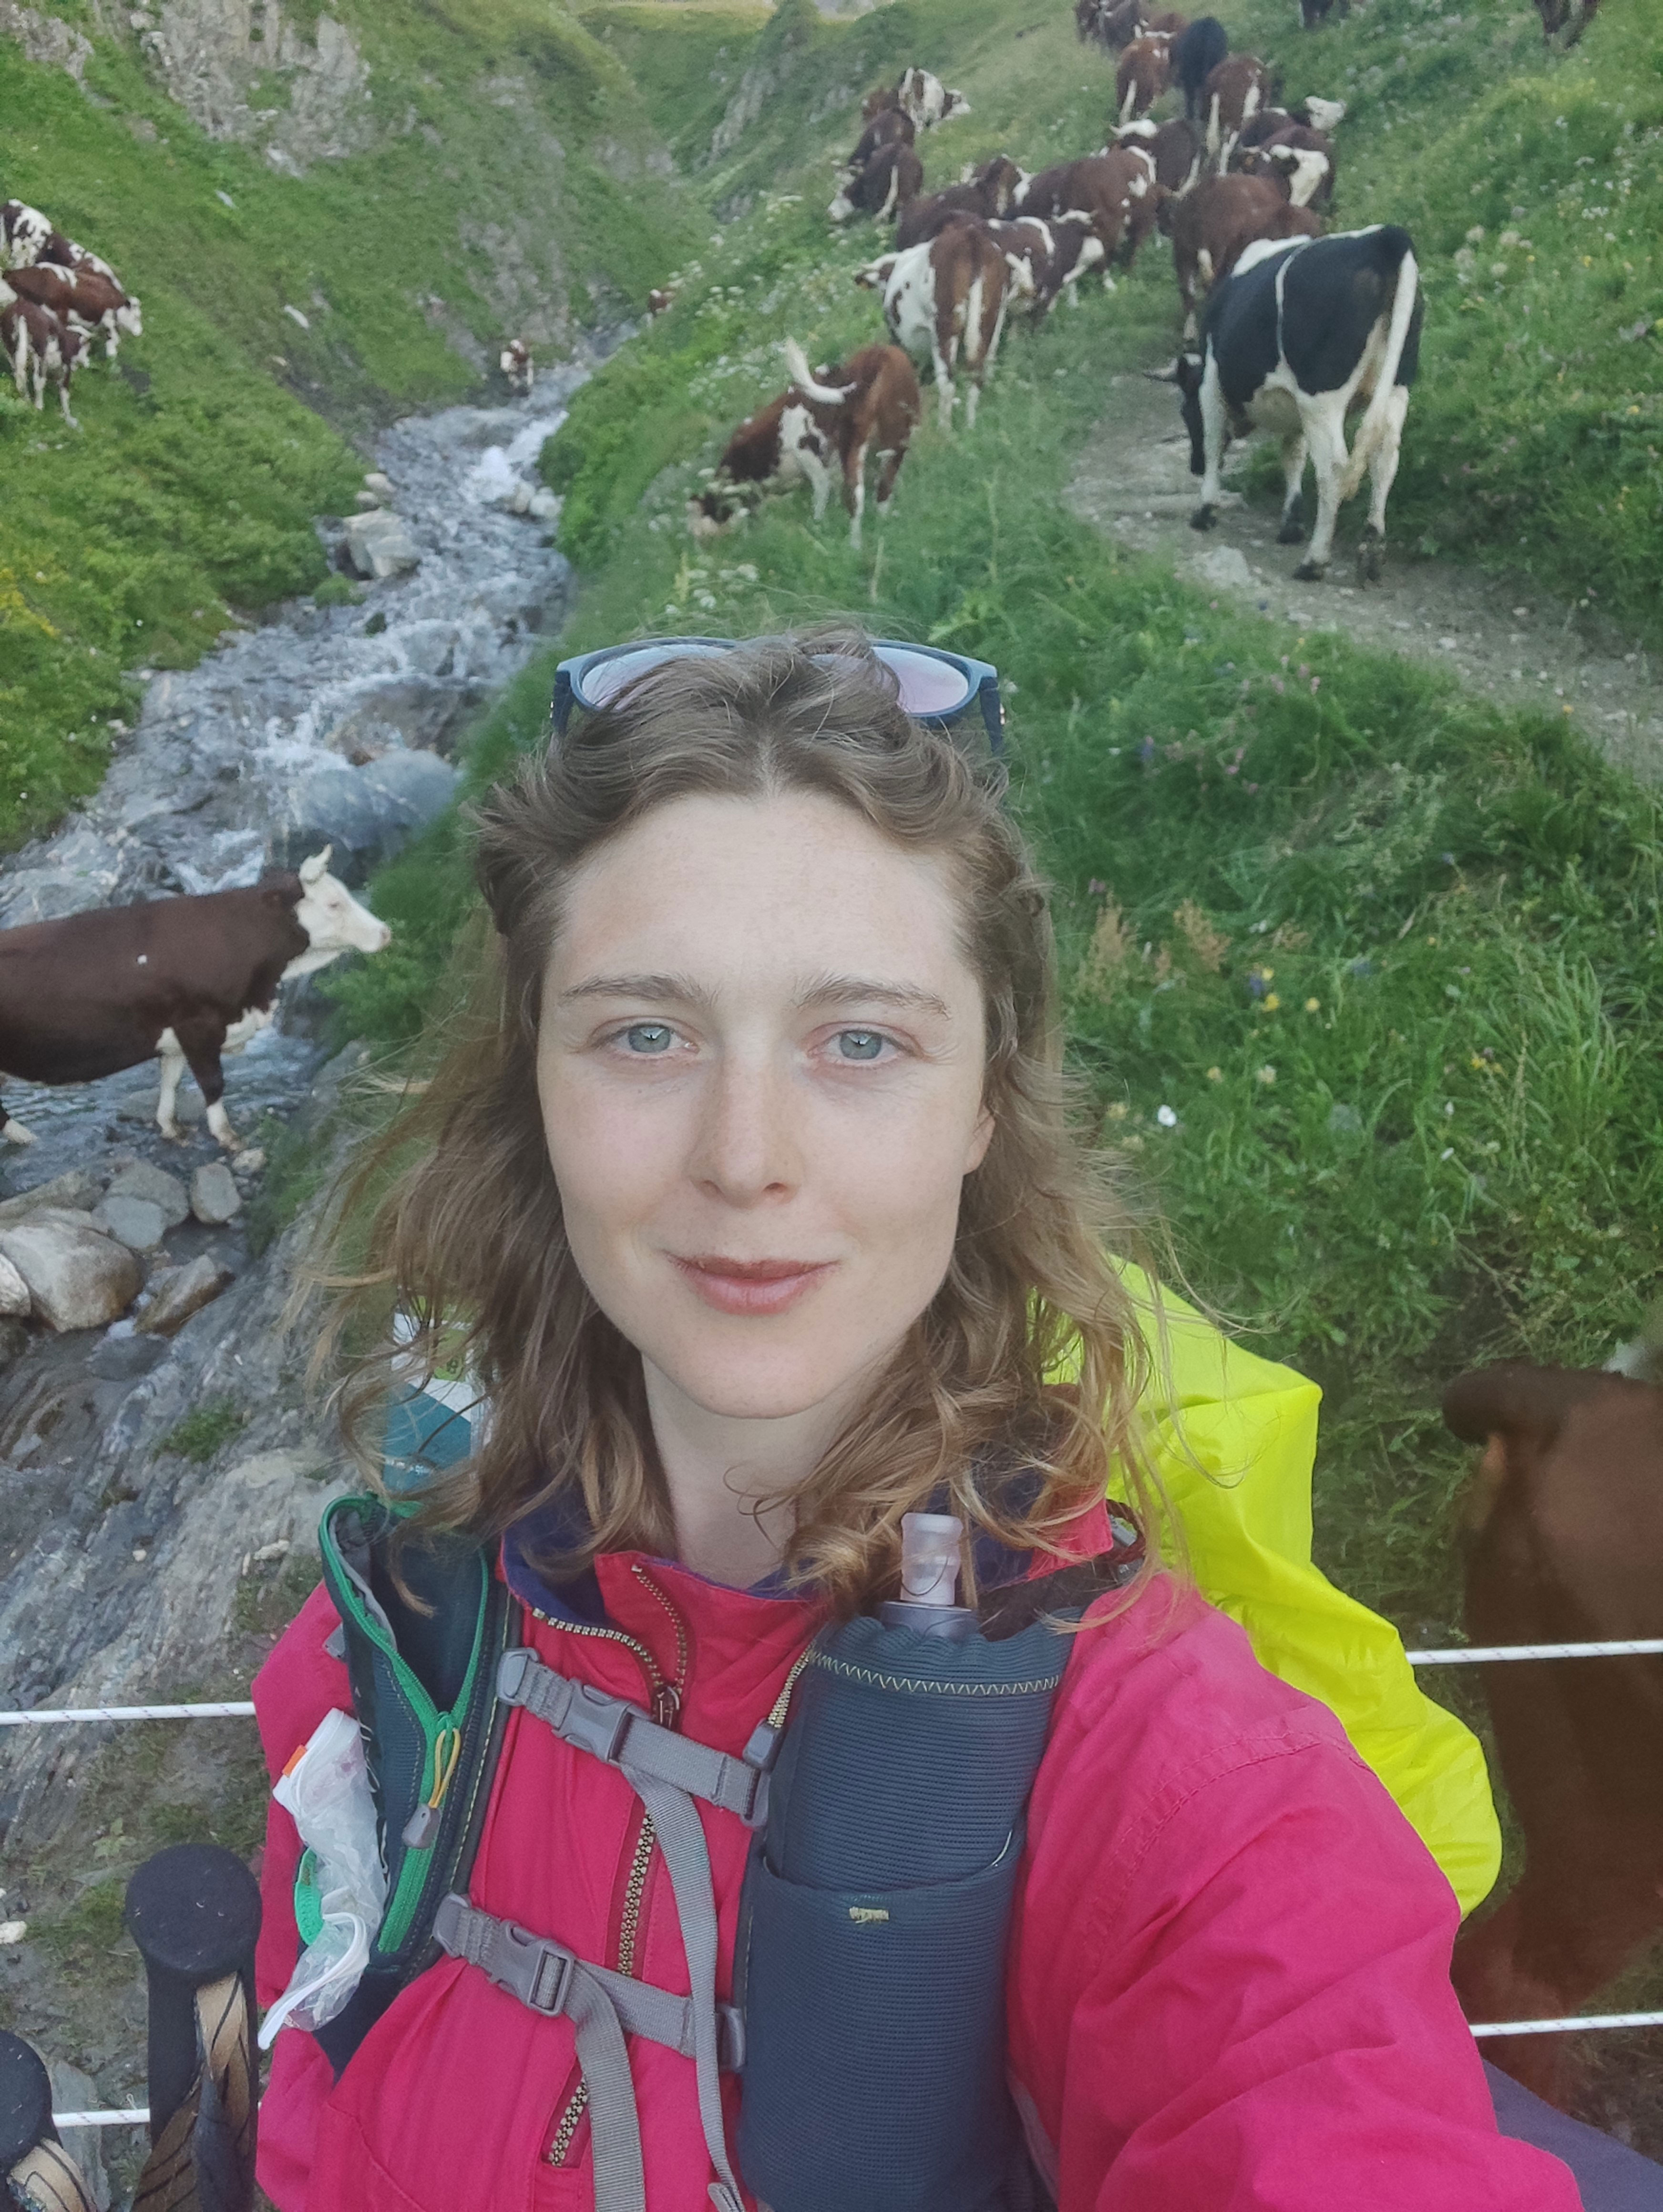 Lucy is wearing hiking gear and is taking a selfie. there are cows in the background